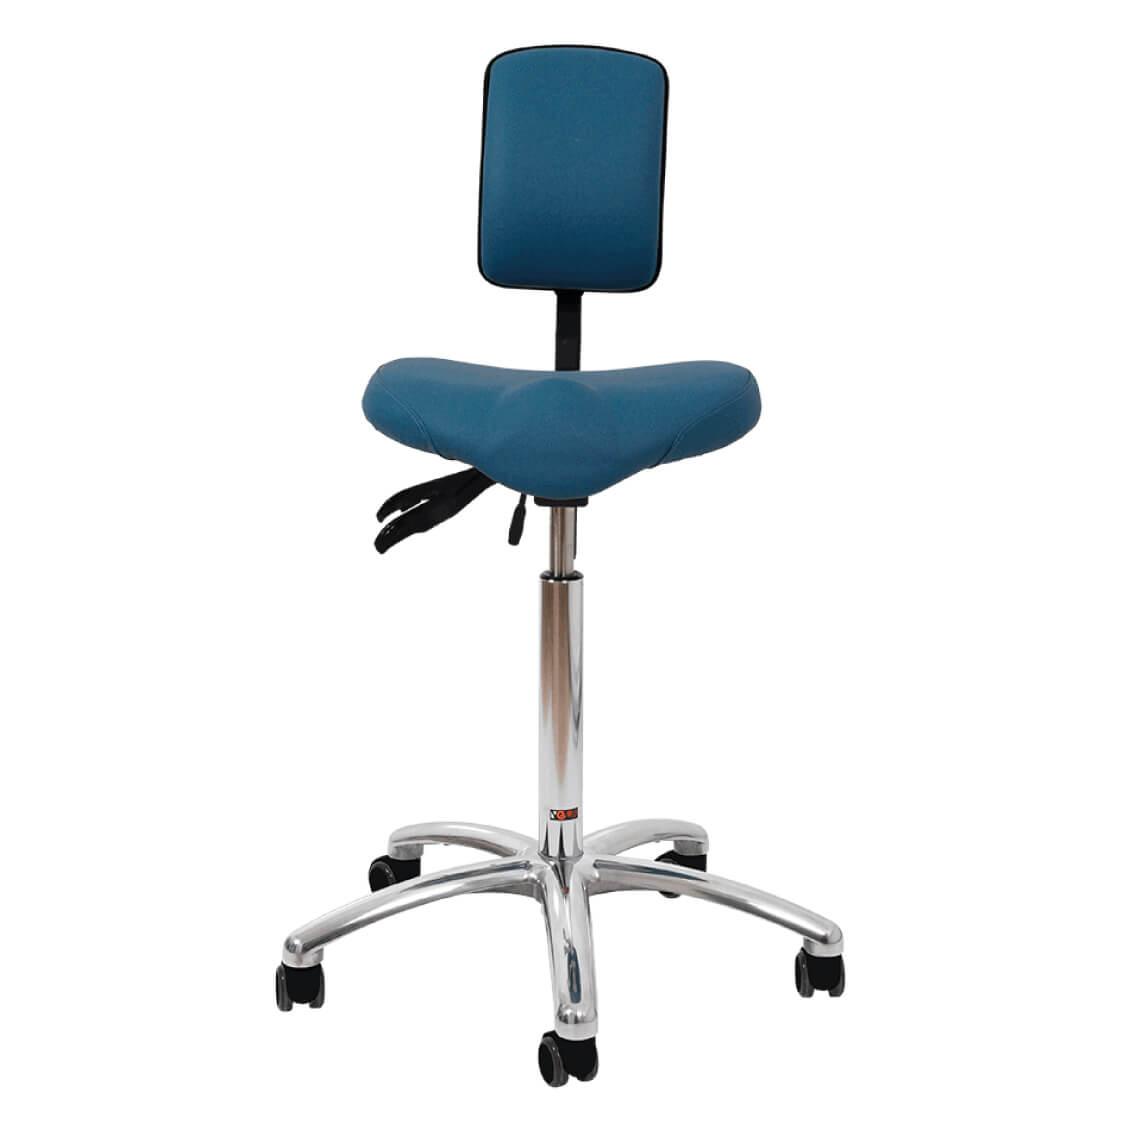 Product Samba Sit-Stand Chair - Agile Medical image